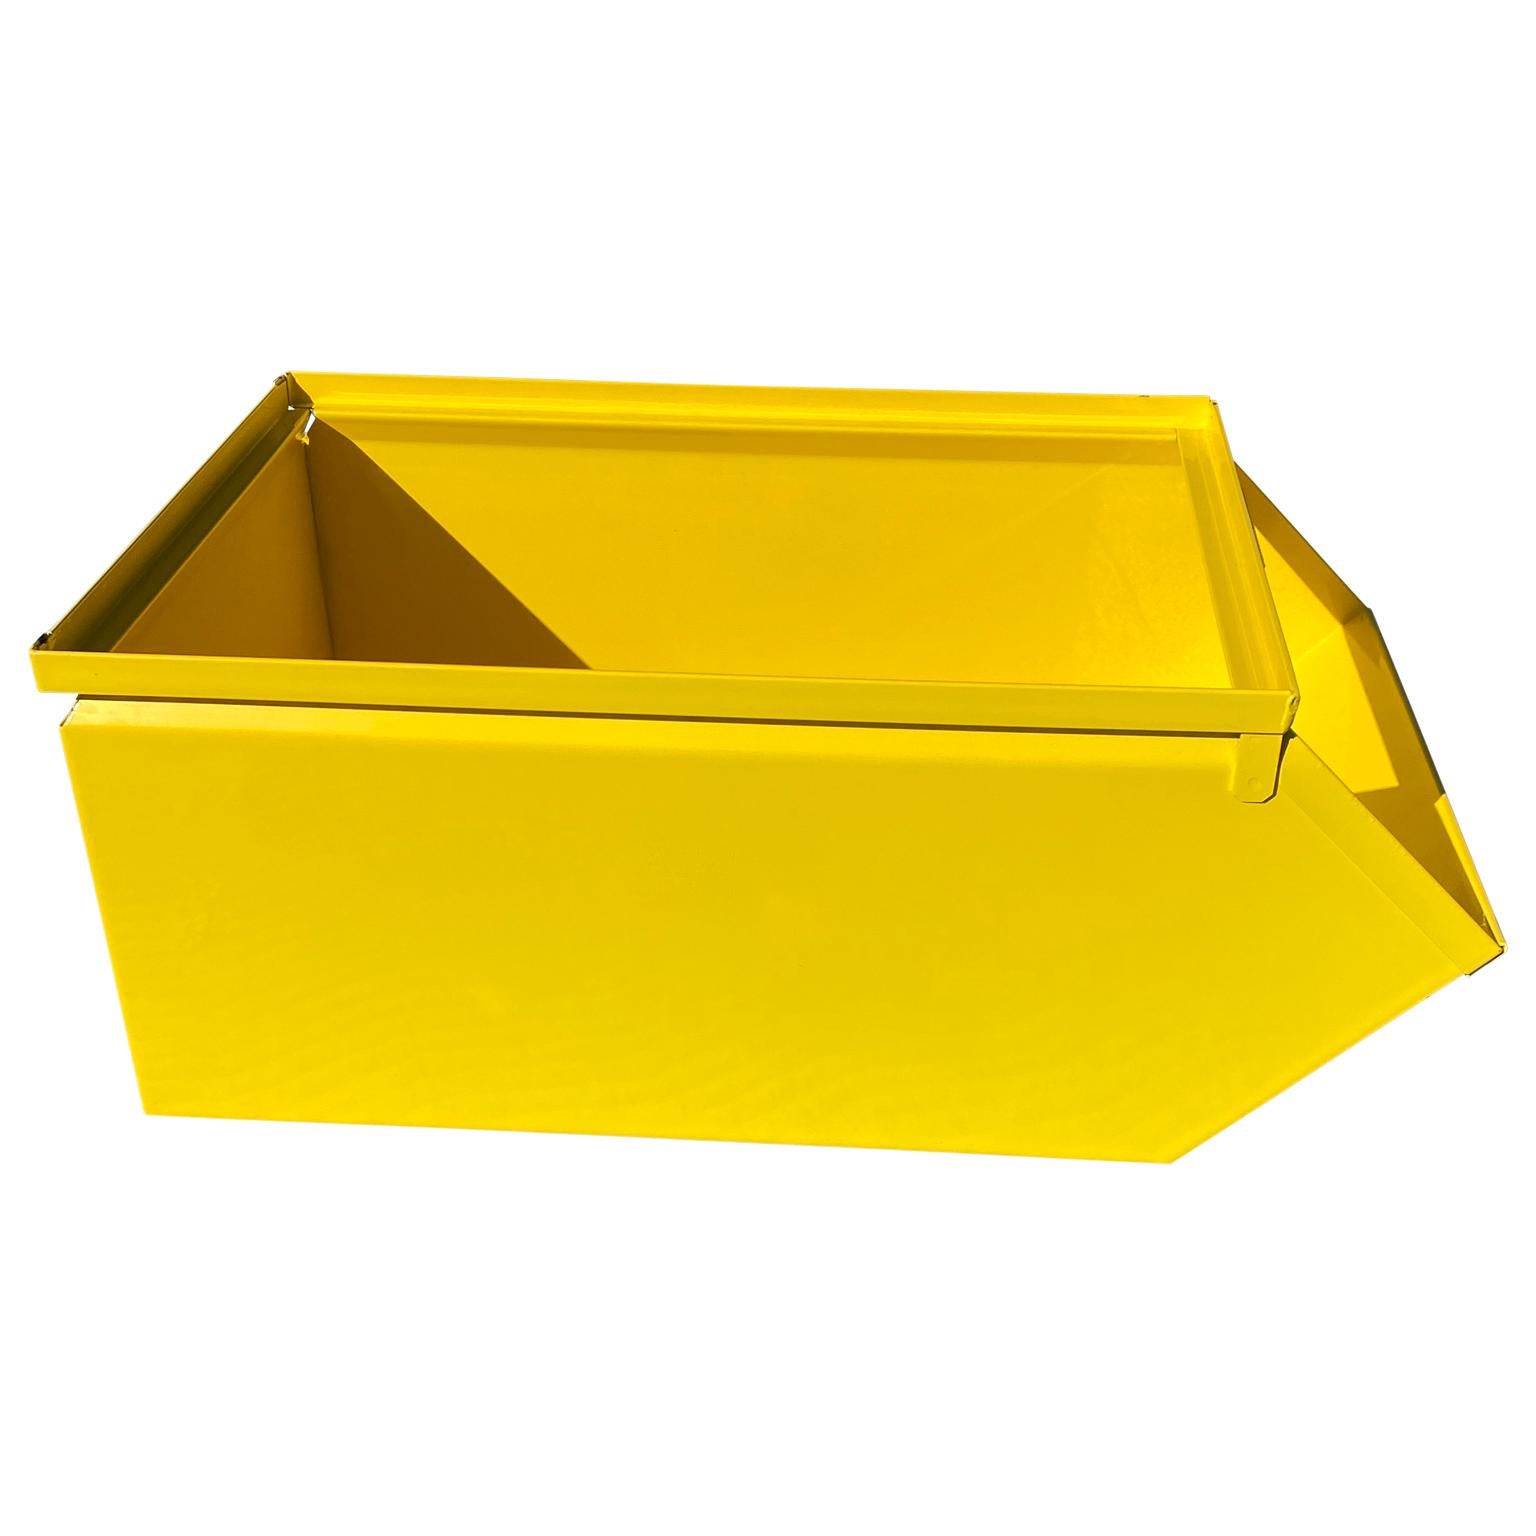 Collection of 10 large vintage industrial powder-coated sunshine yellow metal utility bins or boxes

Other colors are optional, since only one has been powder-coated. 
Lead-time for the additional 9 units is 2-3 weeks.